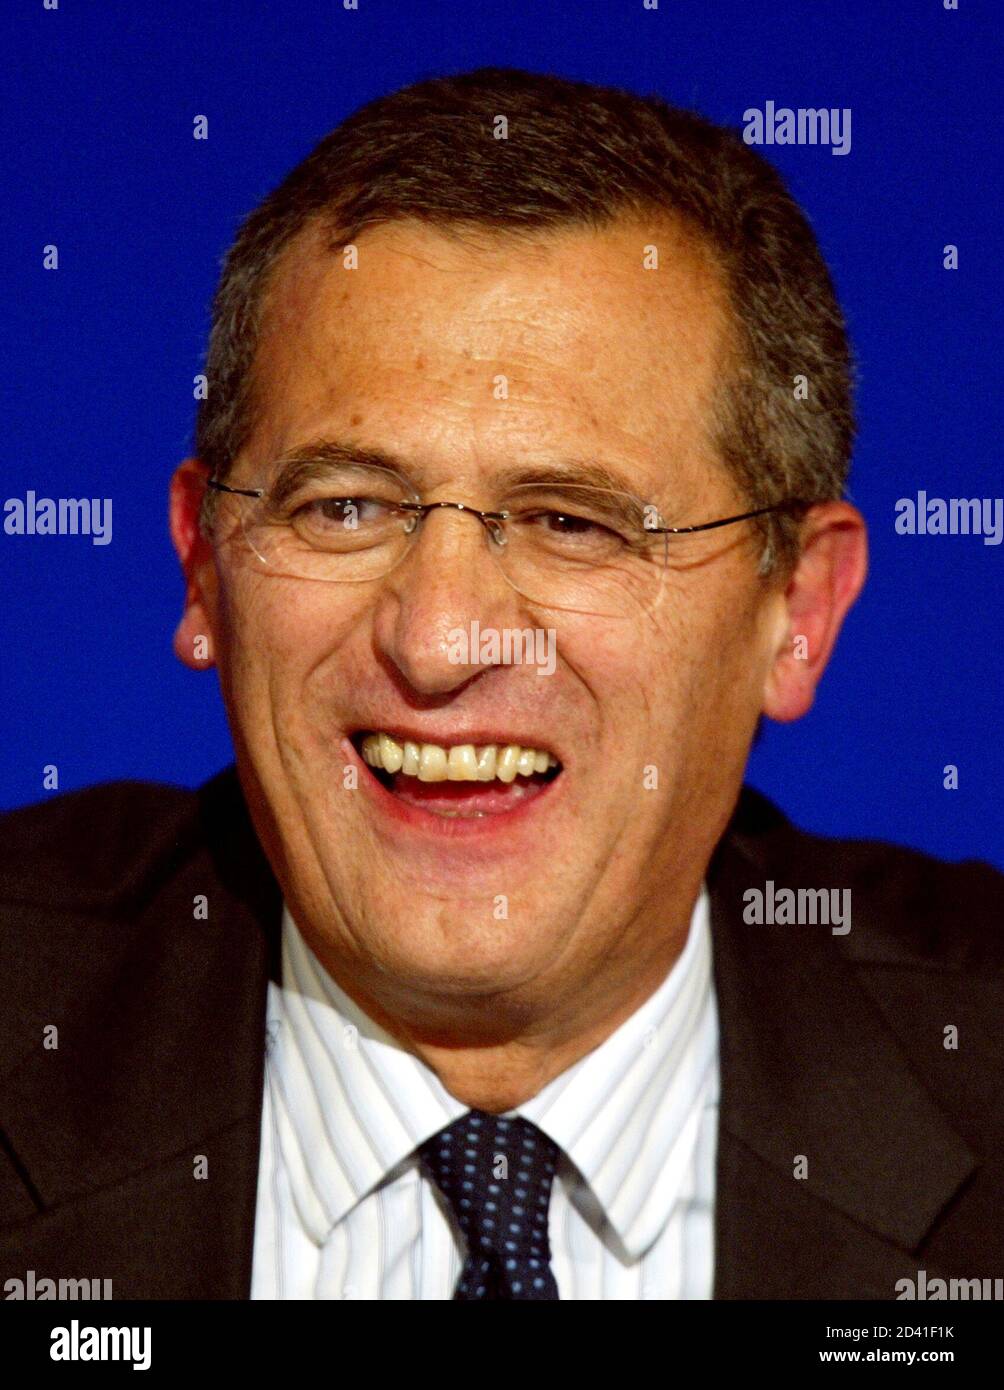 Air France Chairman Jean-Cyril Spinetta answers newsmen during a press  conference at Roissy, northern Paris, September 30, 2003. [Air France and  KLM unveiled plans to create Europe's biggest airline in an all-share